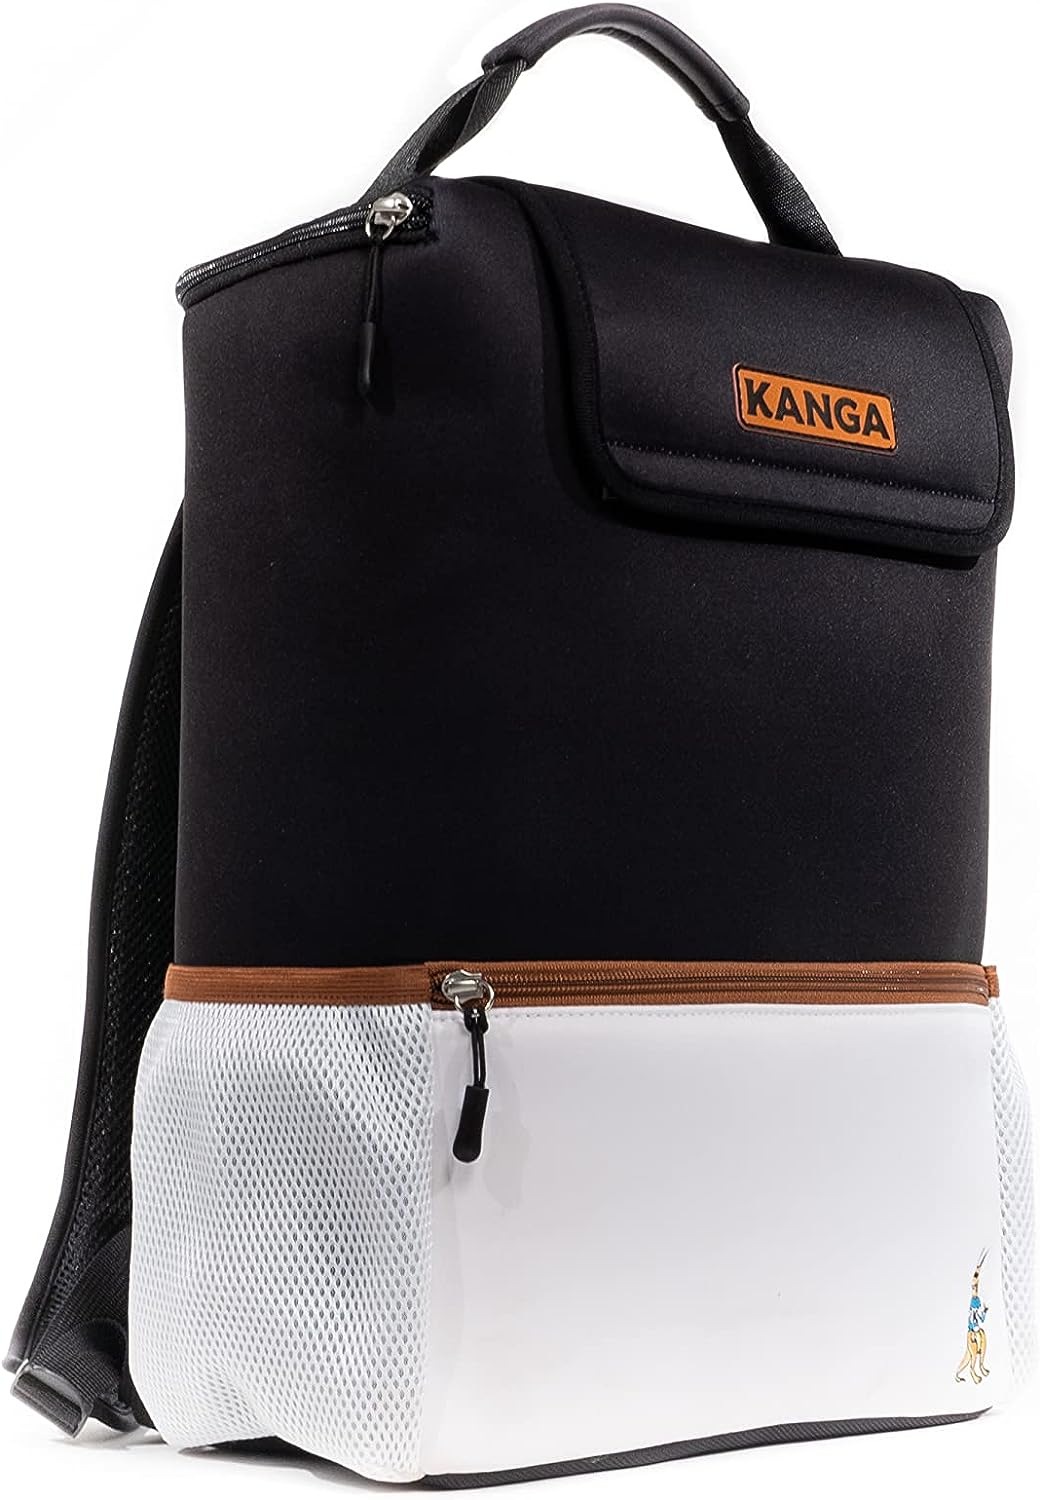 The Pouch 6/12 Pack – Kanga Coolers